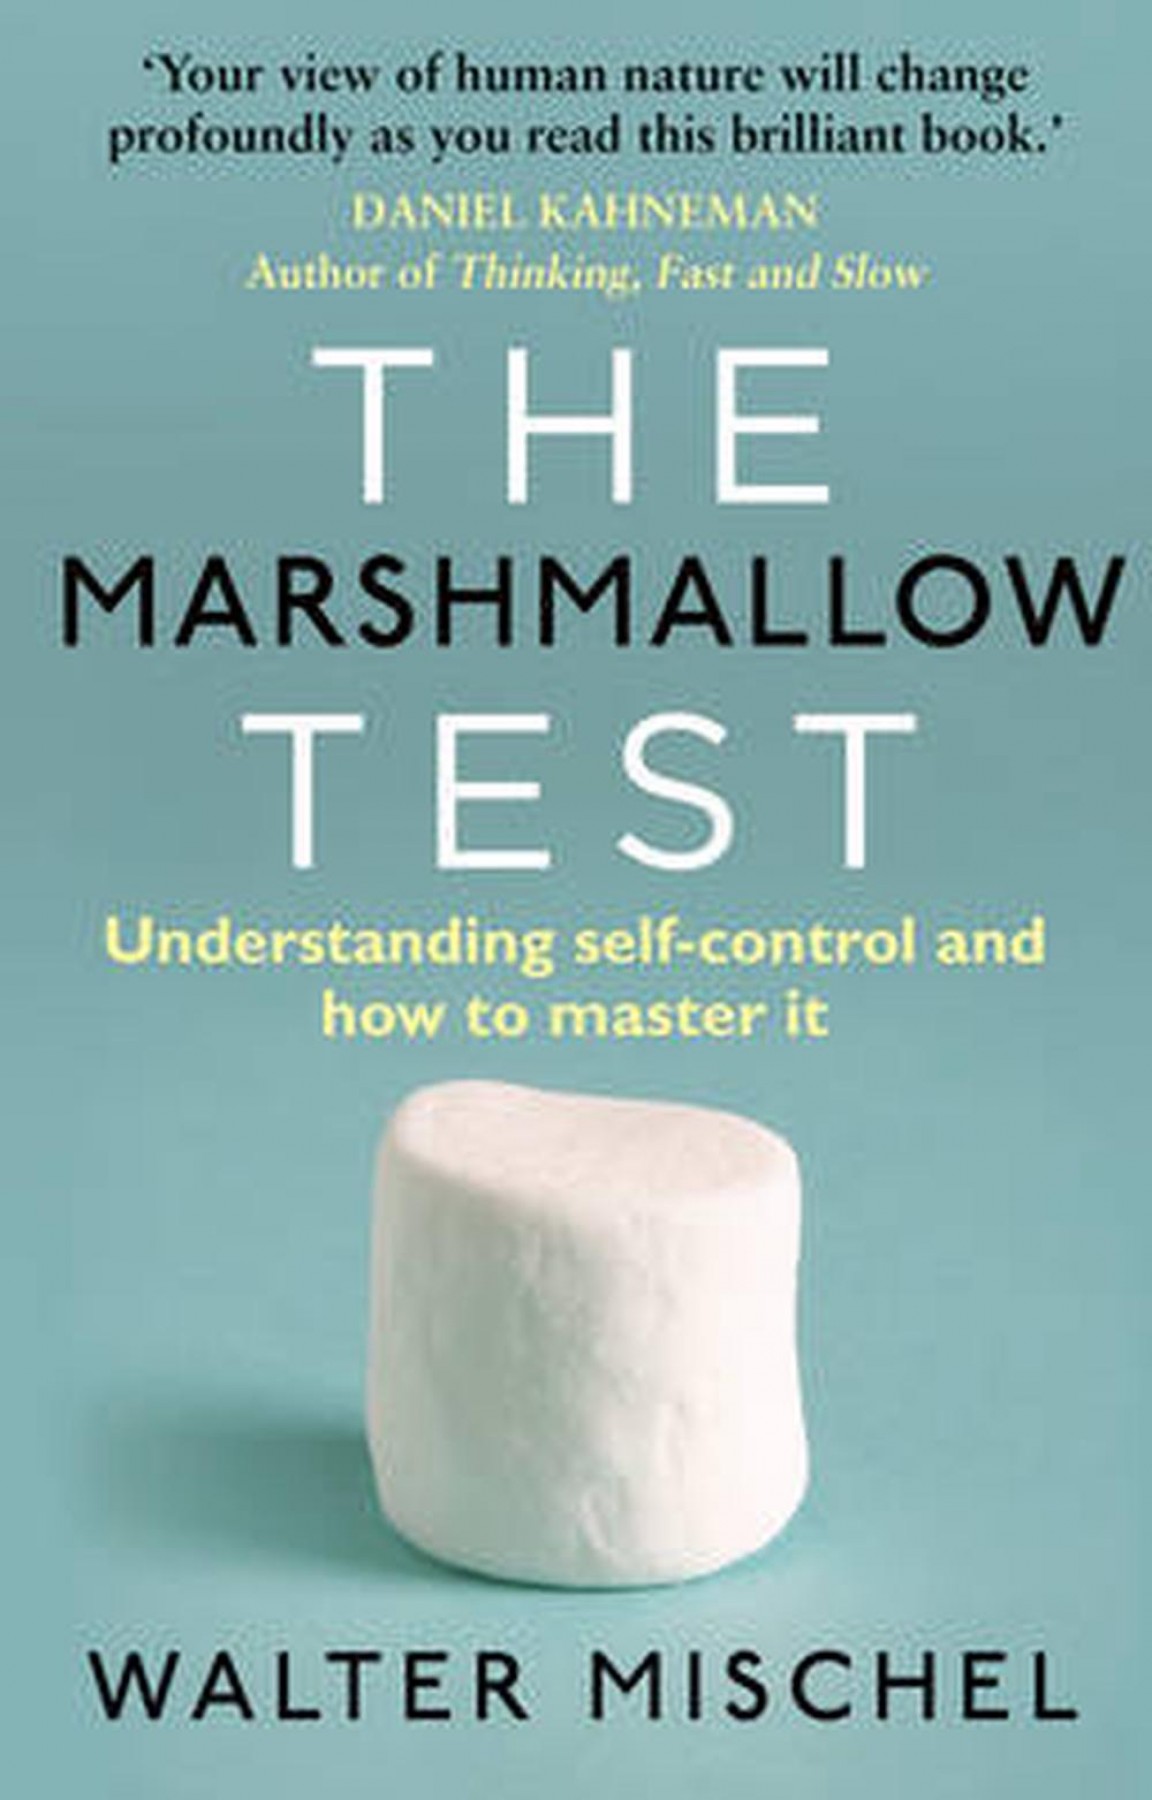 Marshmallow Test: Understanding Self-control and How To Master It book by Walter Mischel